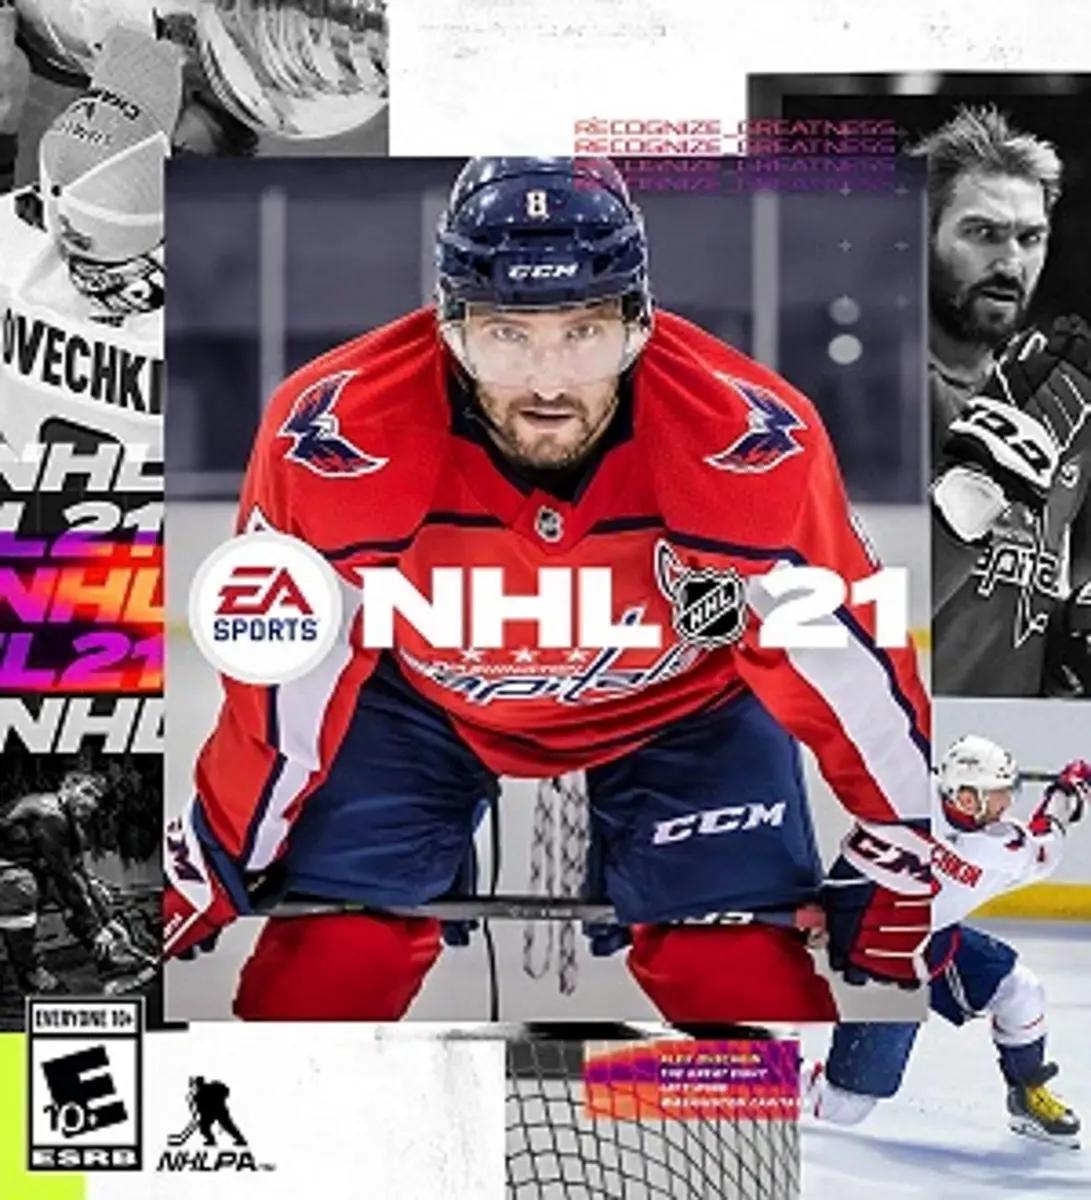 Alexander Ovechkin on the NHL 21 cover.